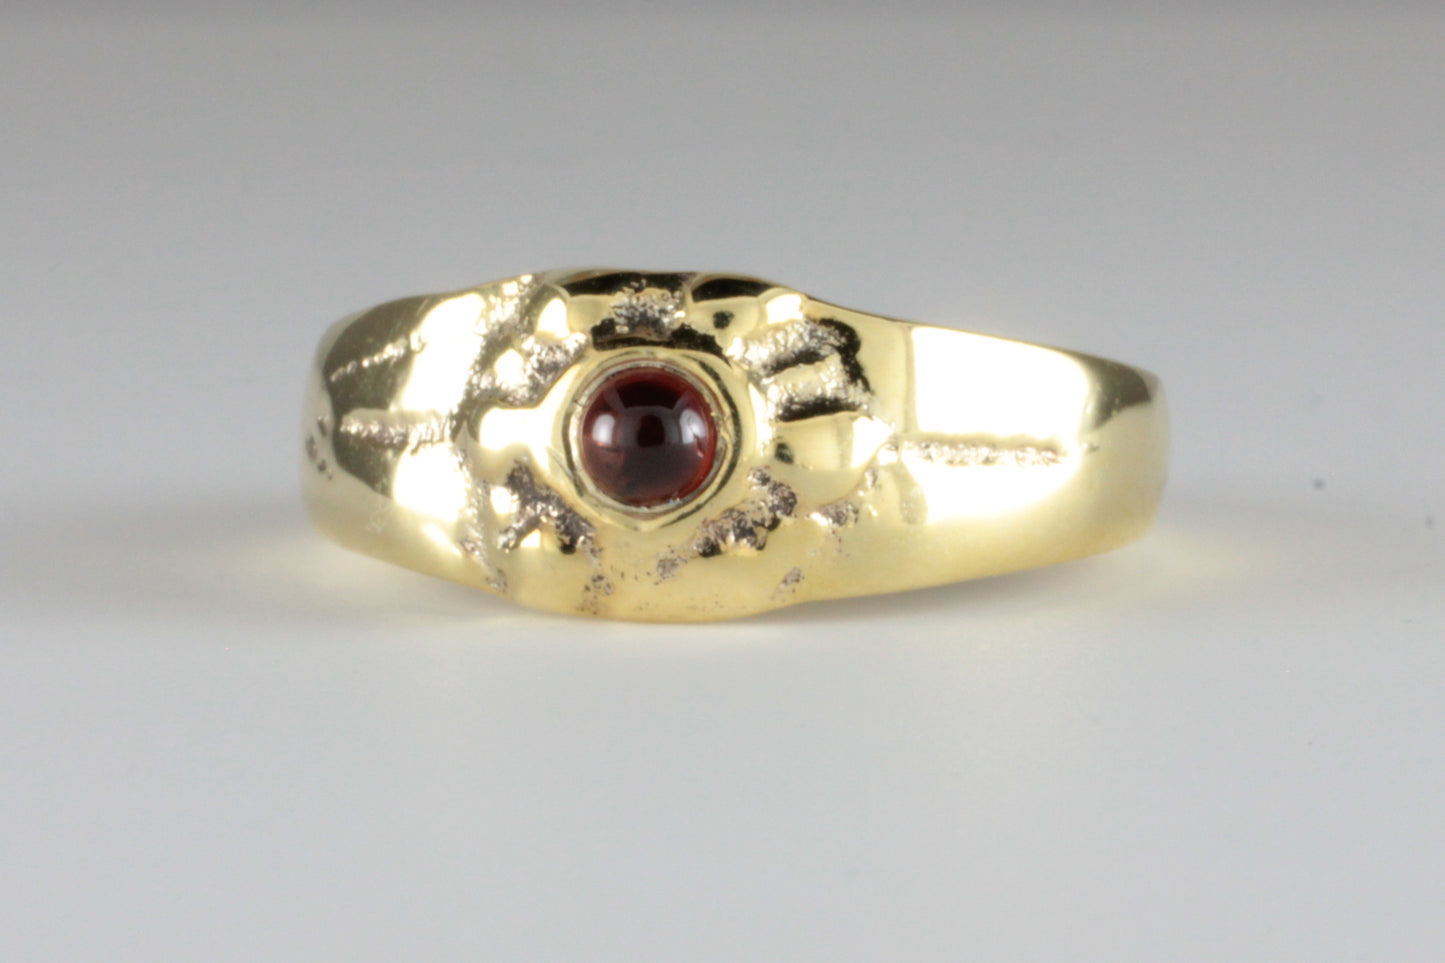 Medieval Style Ring in Gold